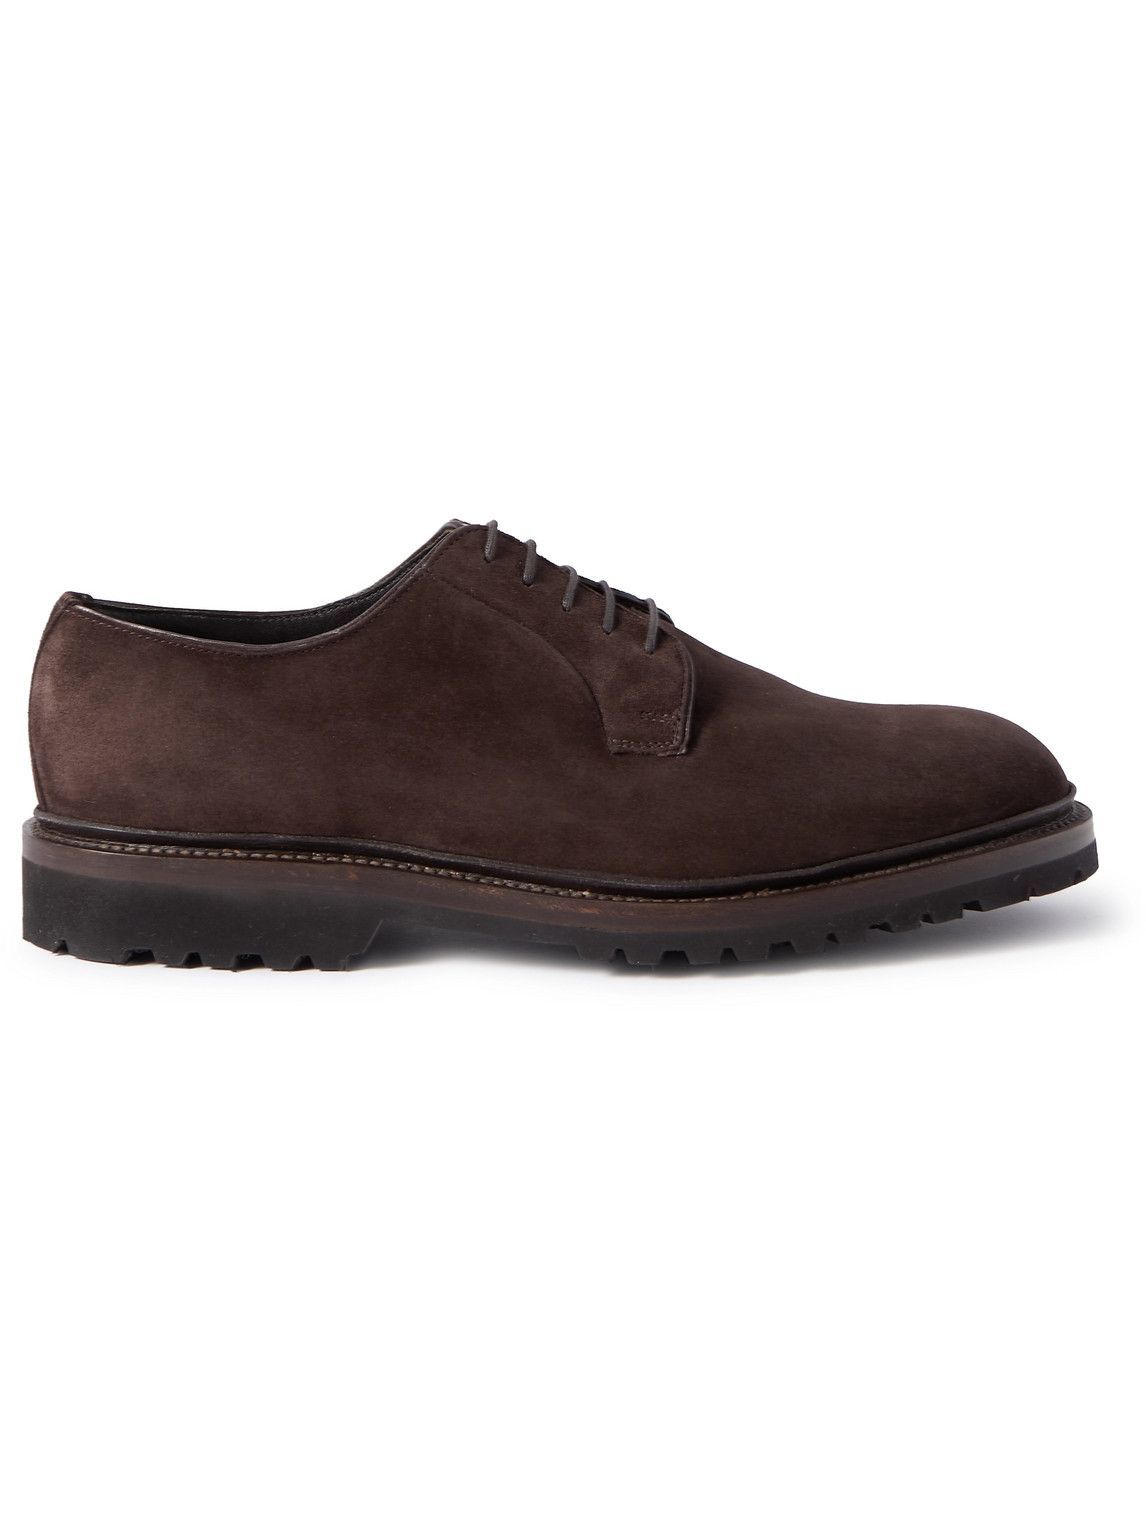 George Cleverley - Archie Suede Derby Shoes - Brown George Cleverley